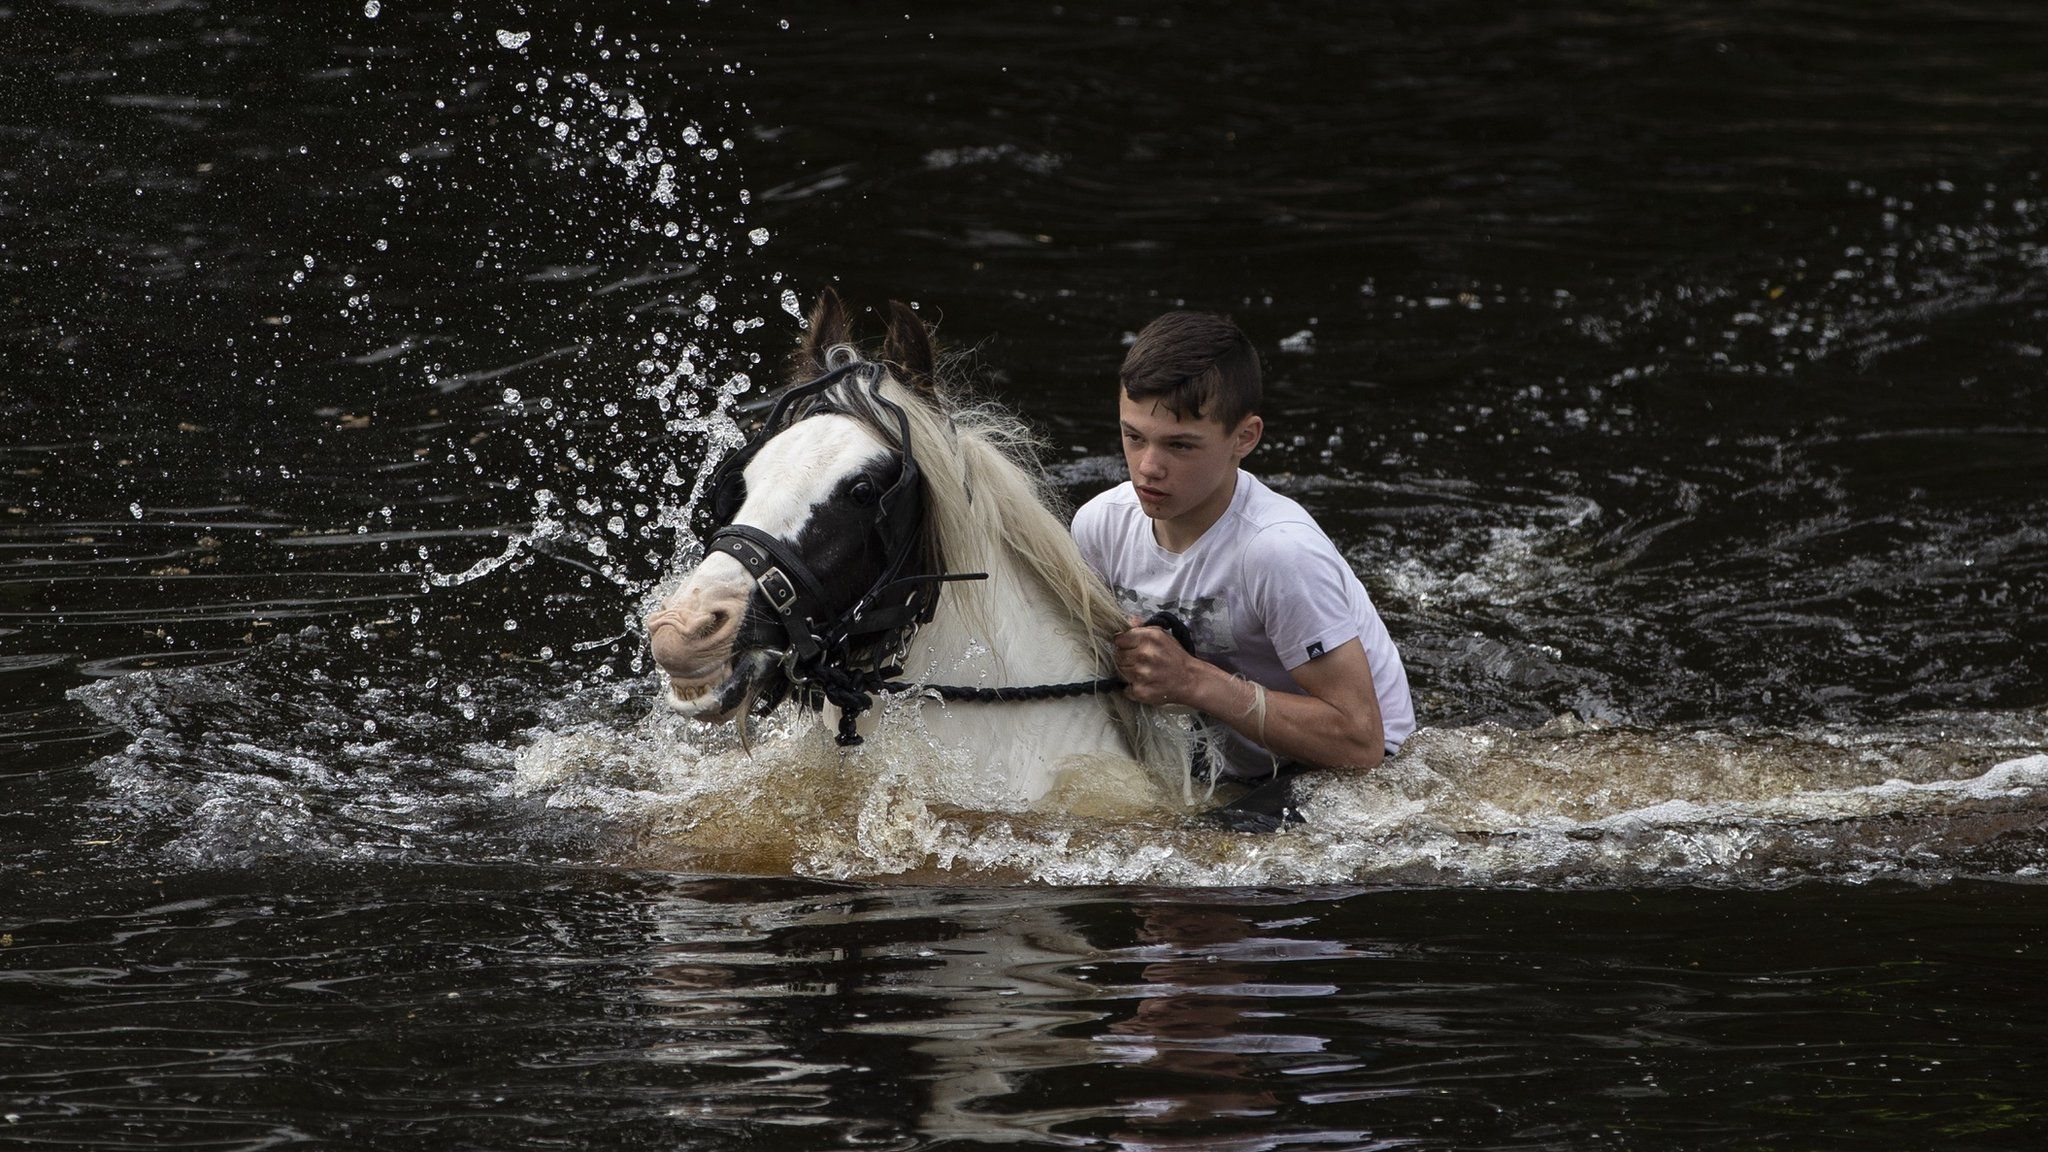 A boy rides his horse in the River Eden during the annual Appleby Horse Fair